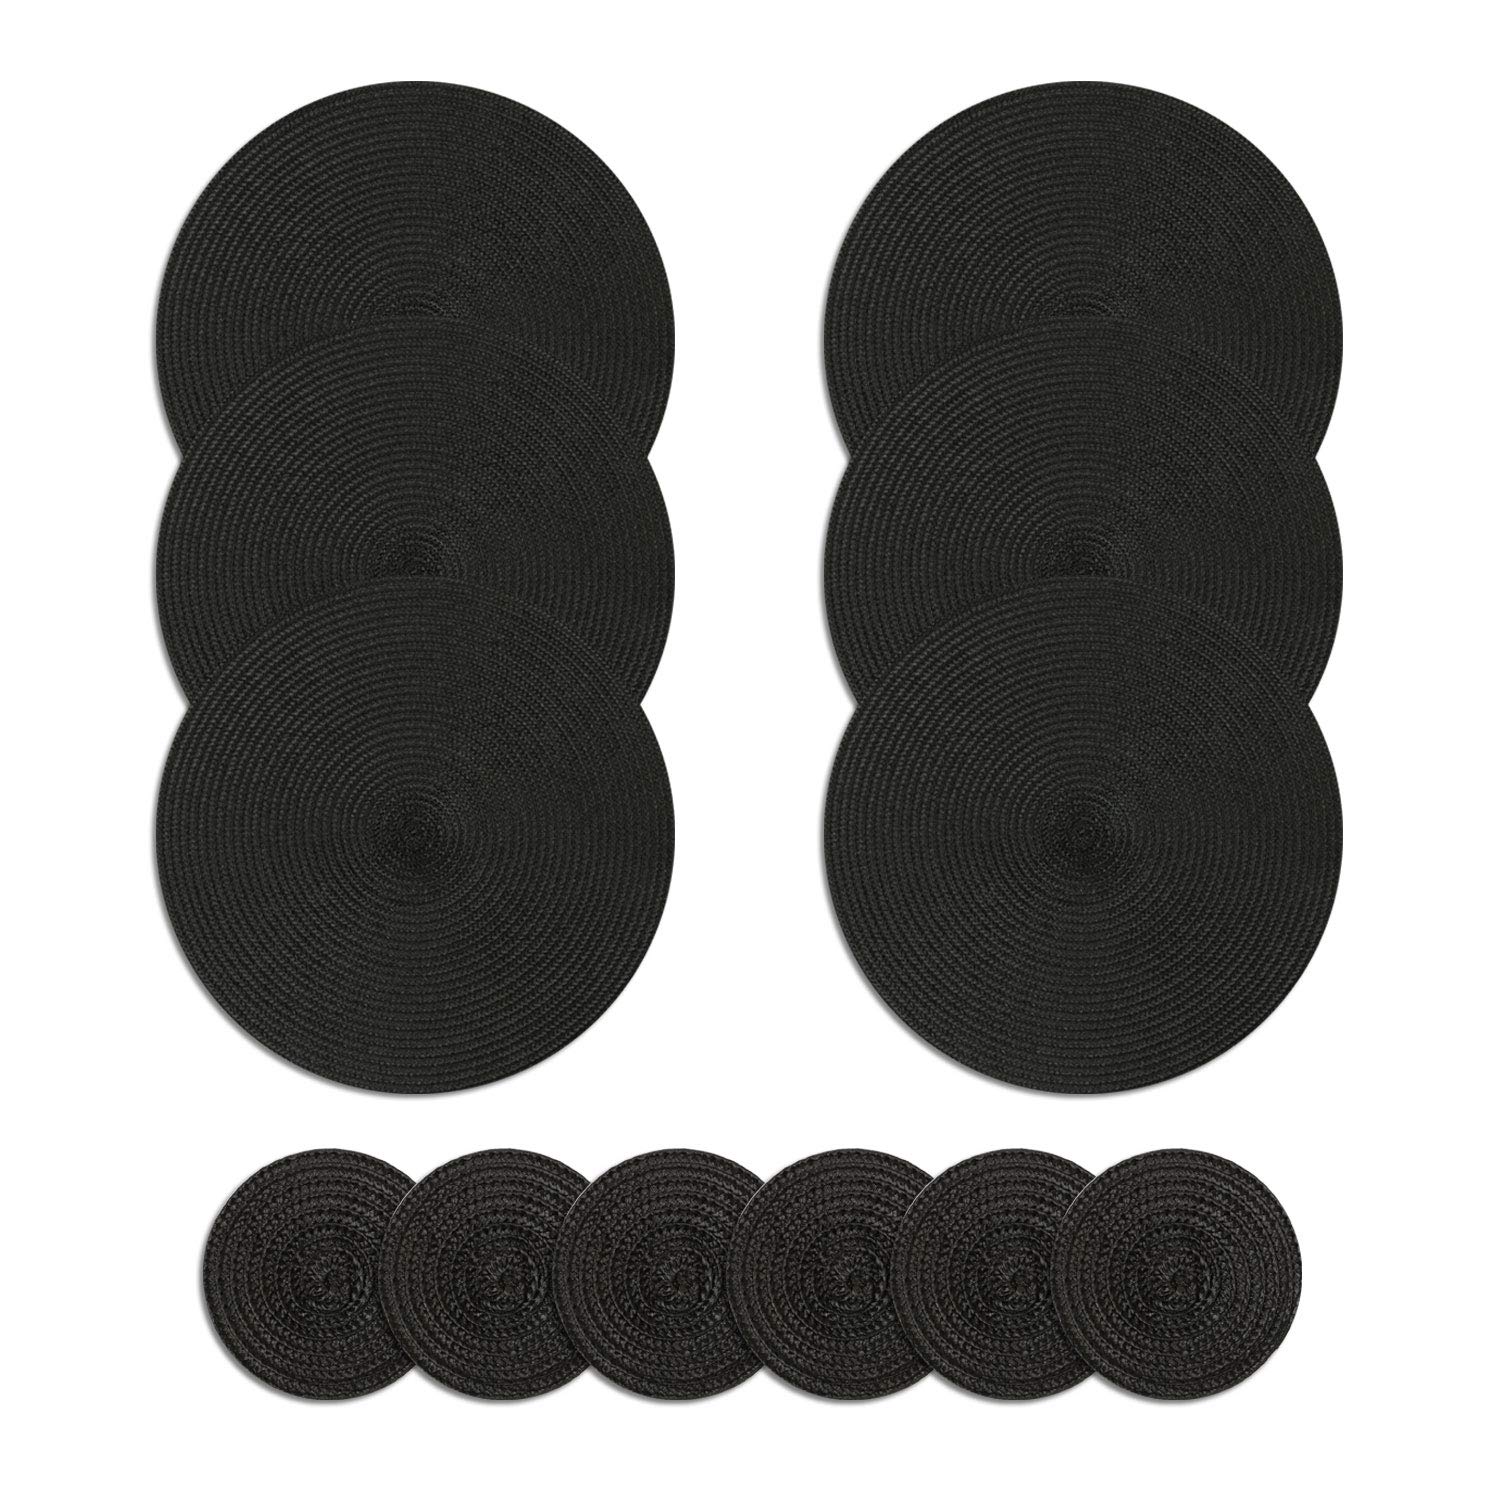 Homcomodar Round Placemats and Coasters Set of 6 Braided Woven Table Place Mats for Dining Table(Black)